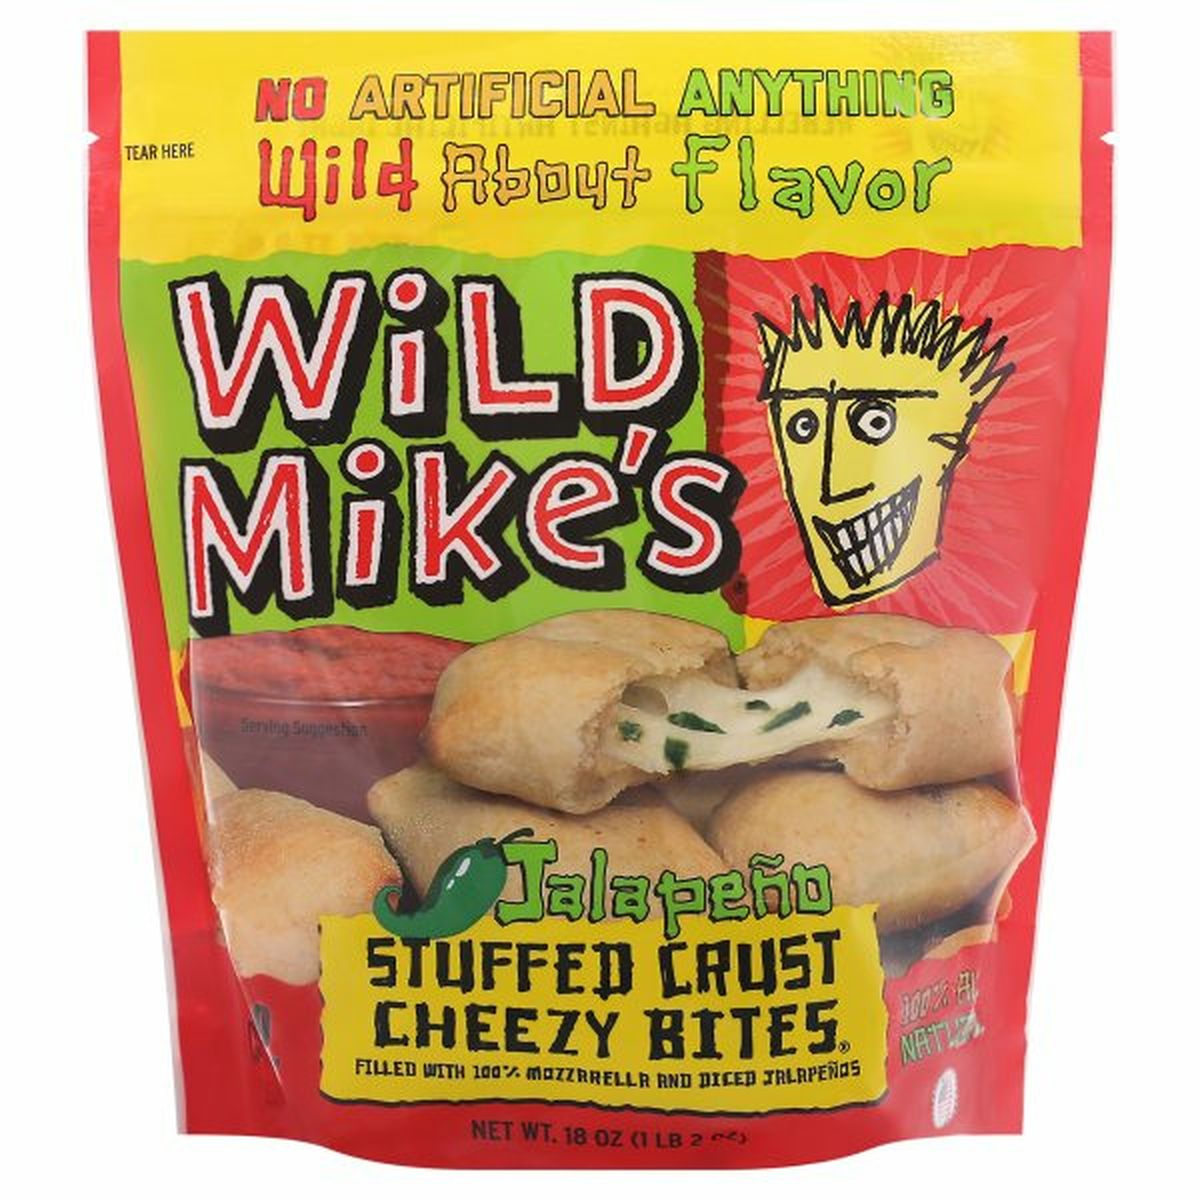 Calories in Wild Mike's Cheezy Bites, Stuffed Crust, Jalapeno